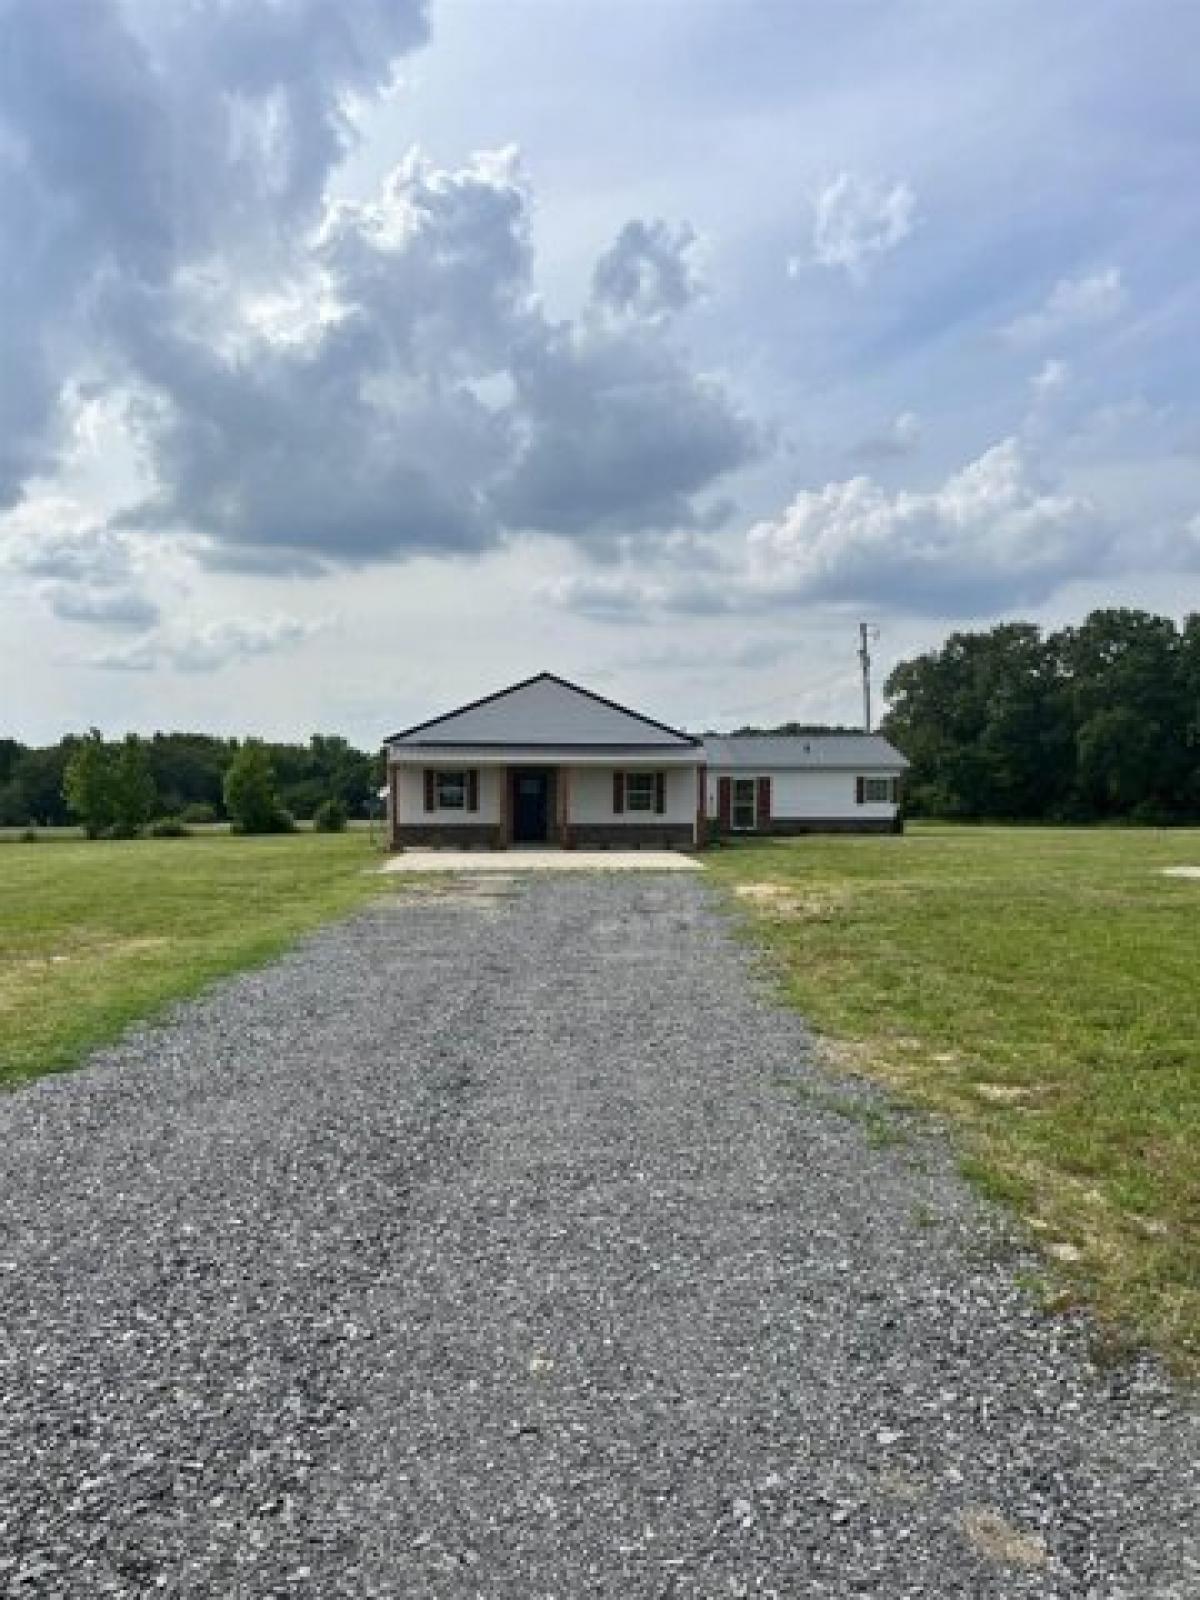 Picture of Home For Sale in Bald Knob, Arkansas, United States